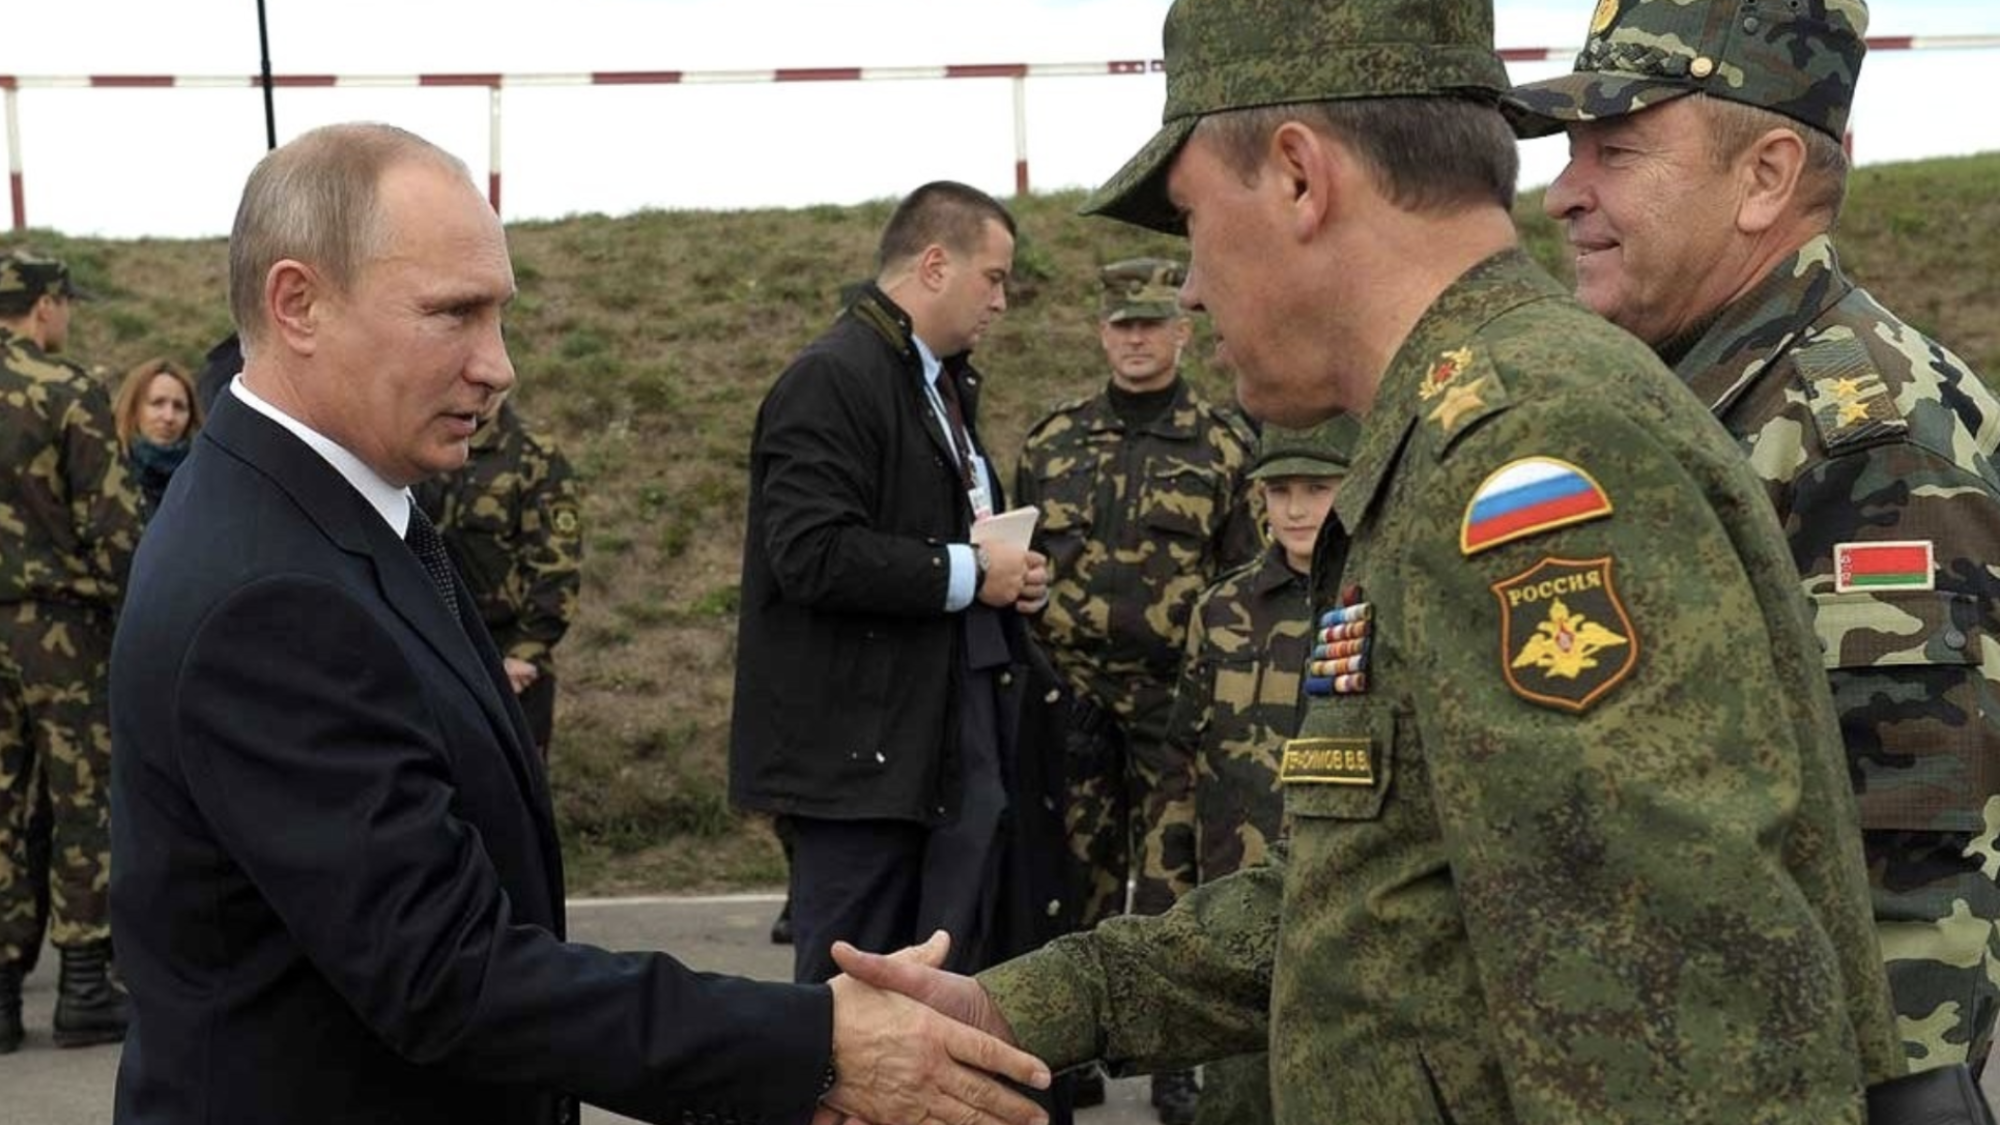 Vladimir Putin shakes the hand of a member of the Russian military.